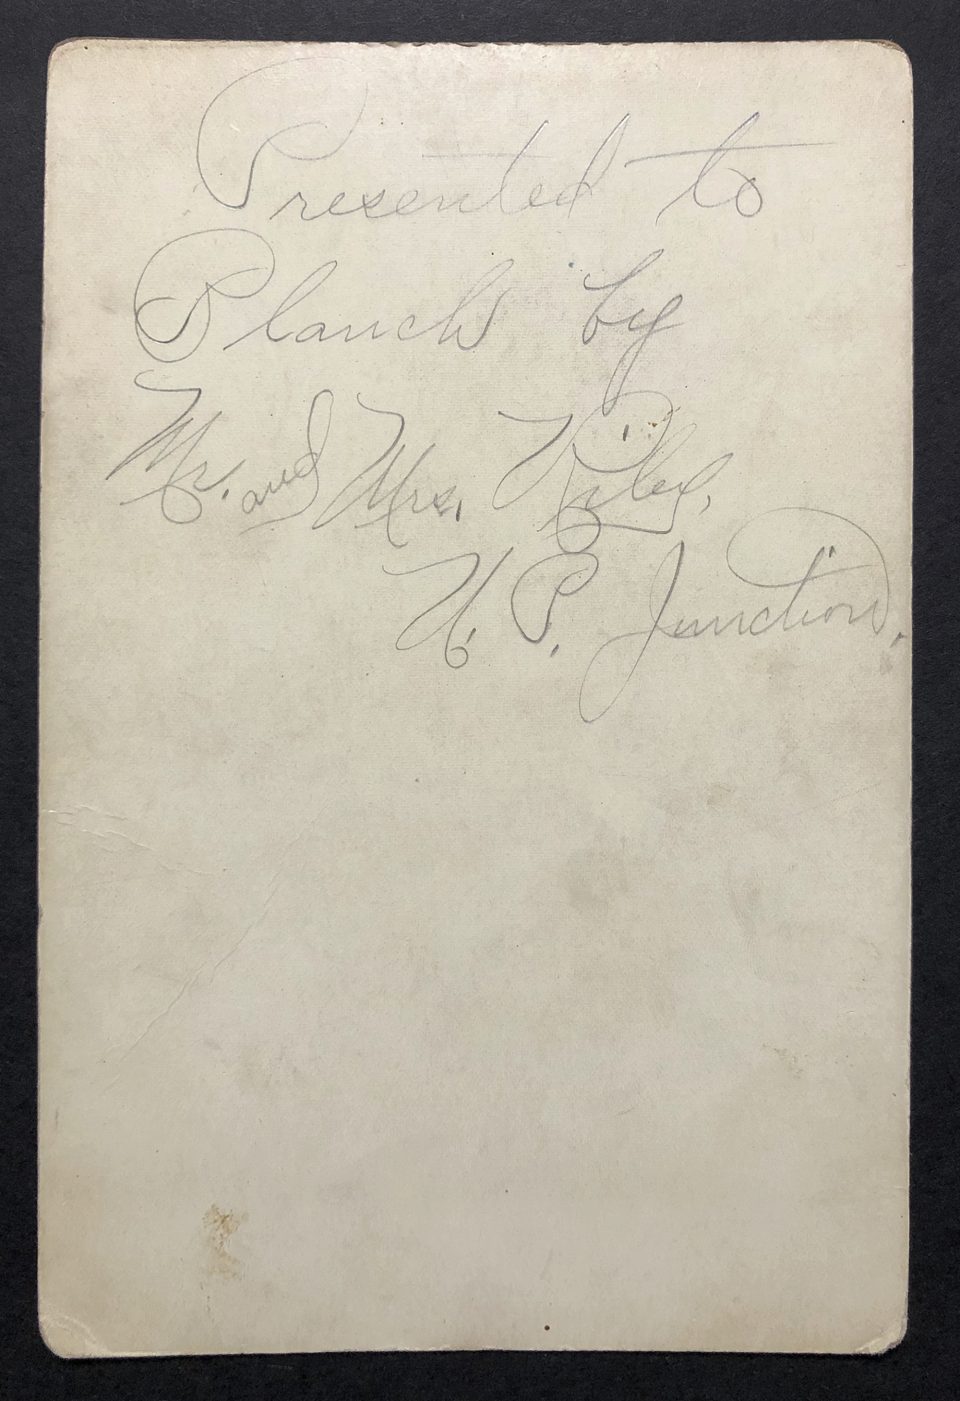 Look at the beautiful handwriting on the back of this cabinet card.  It says, "Presented to Blanch by Mr. and Mrs. Riley, U.P. Junction."